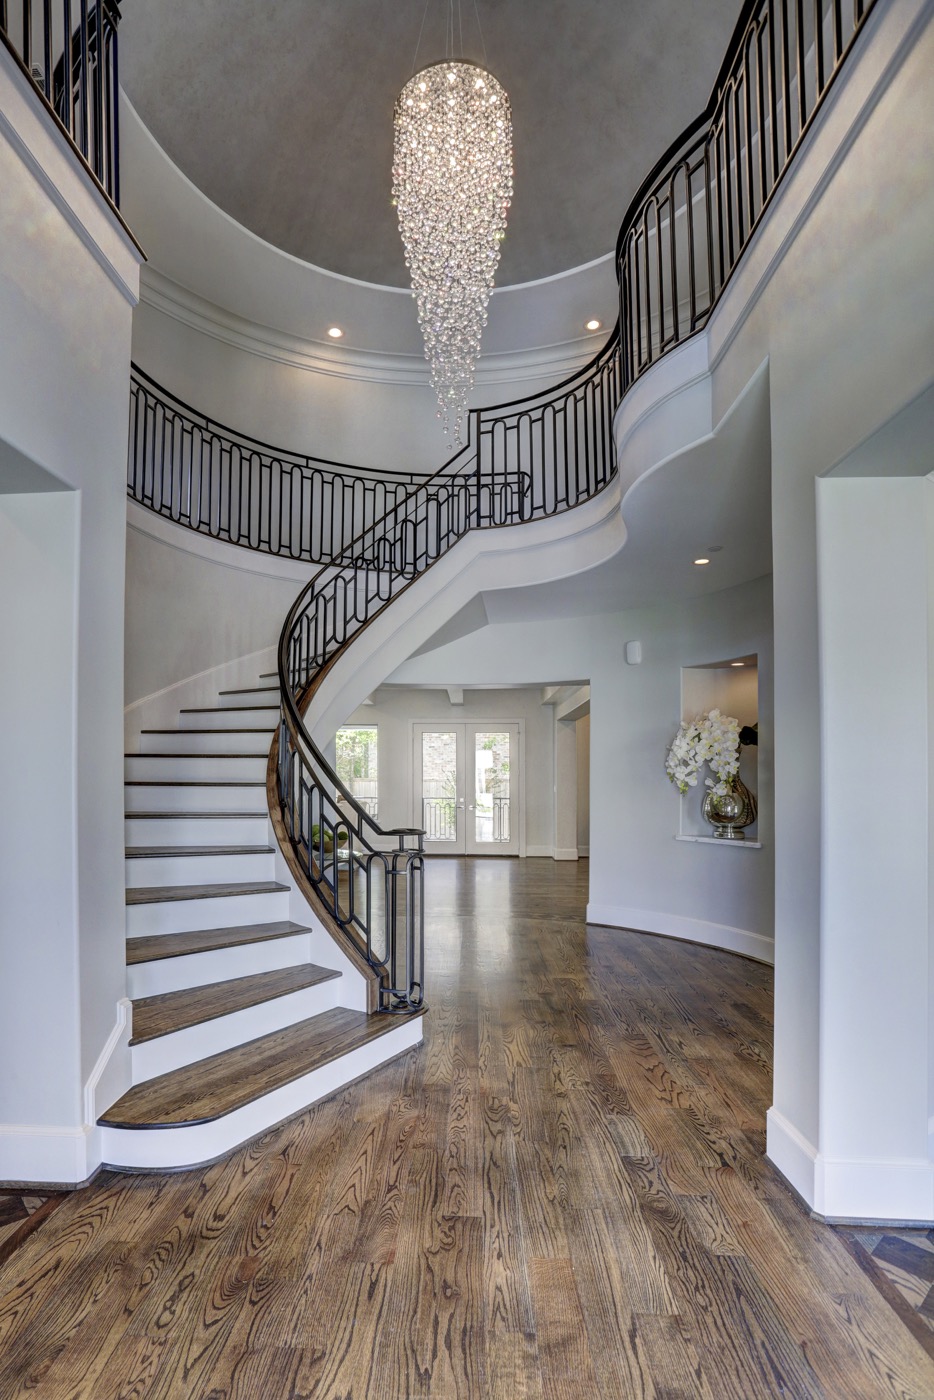 Curved staircase showcases the crystal chandelier